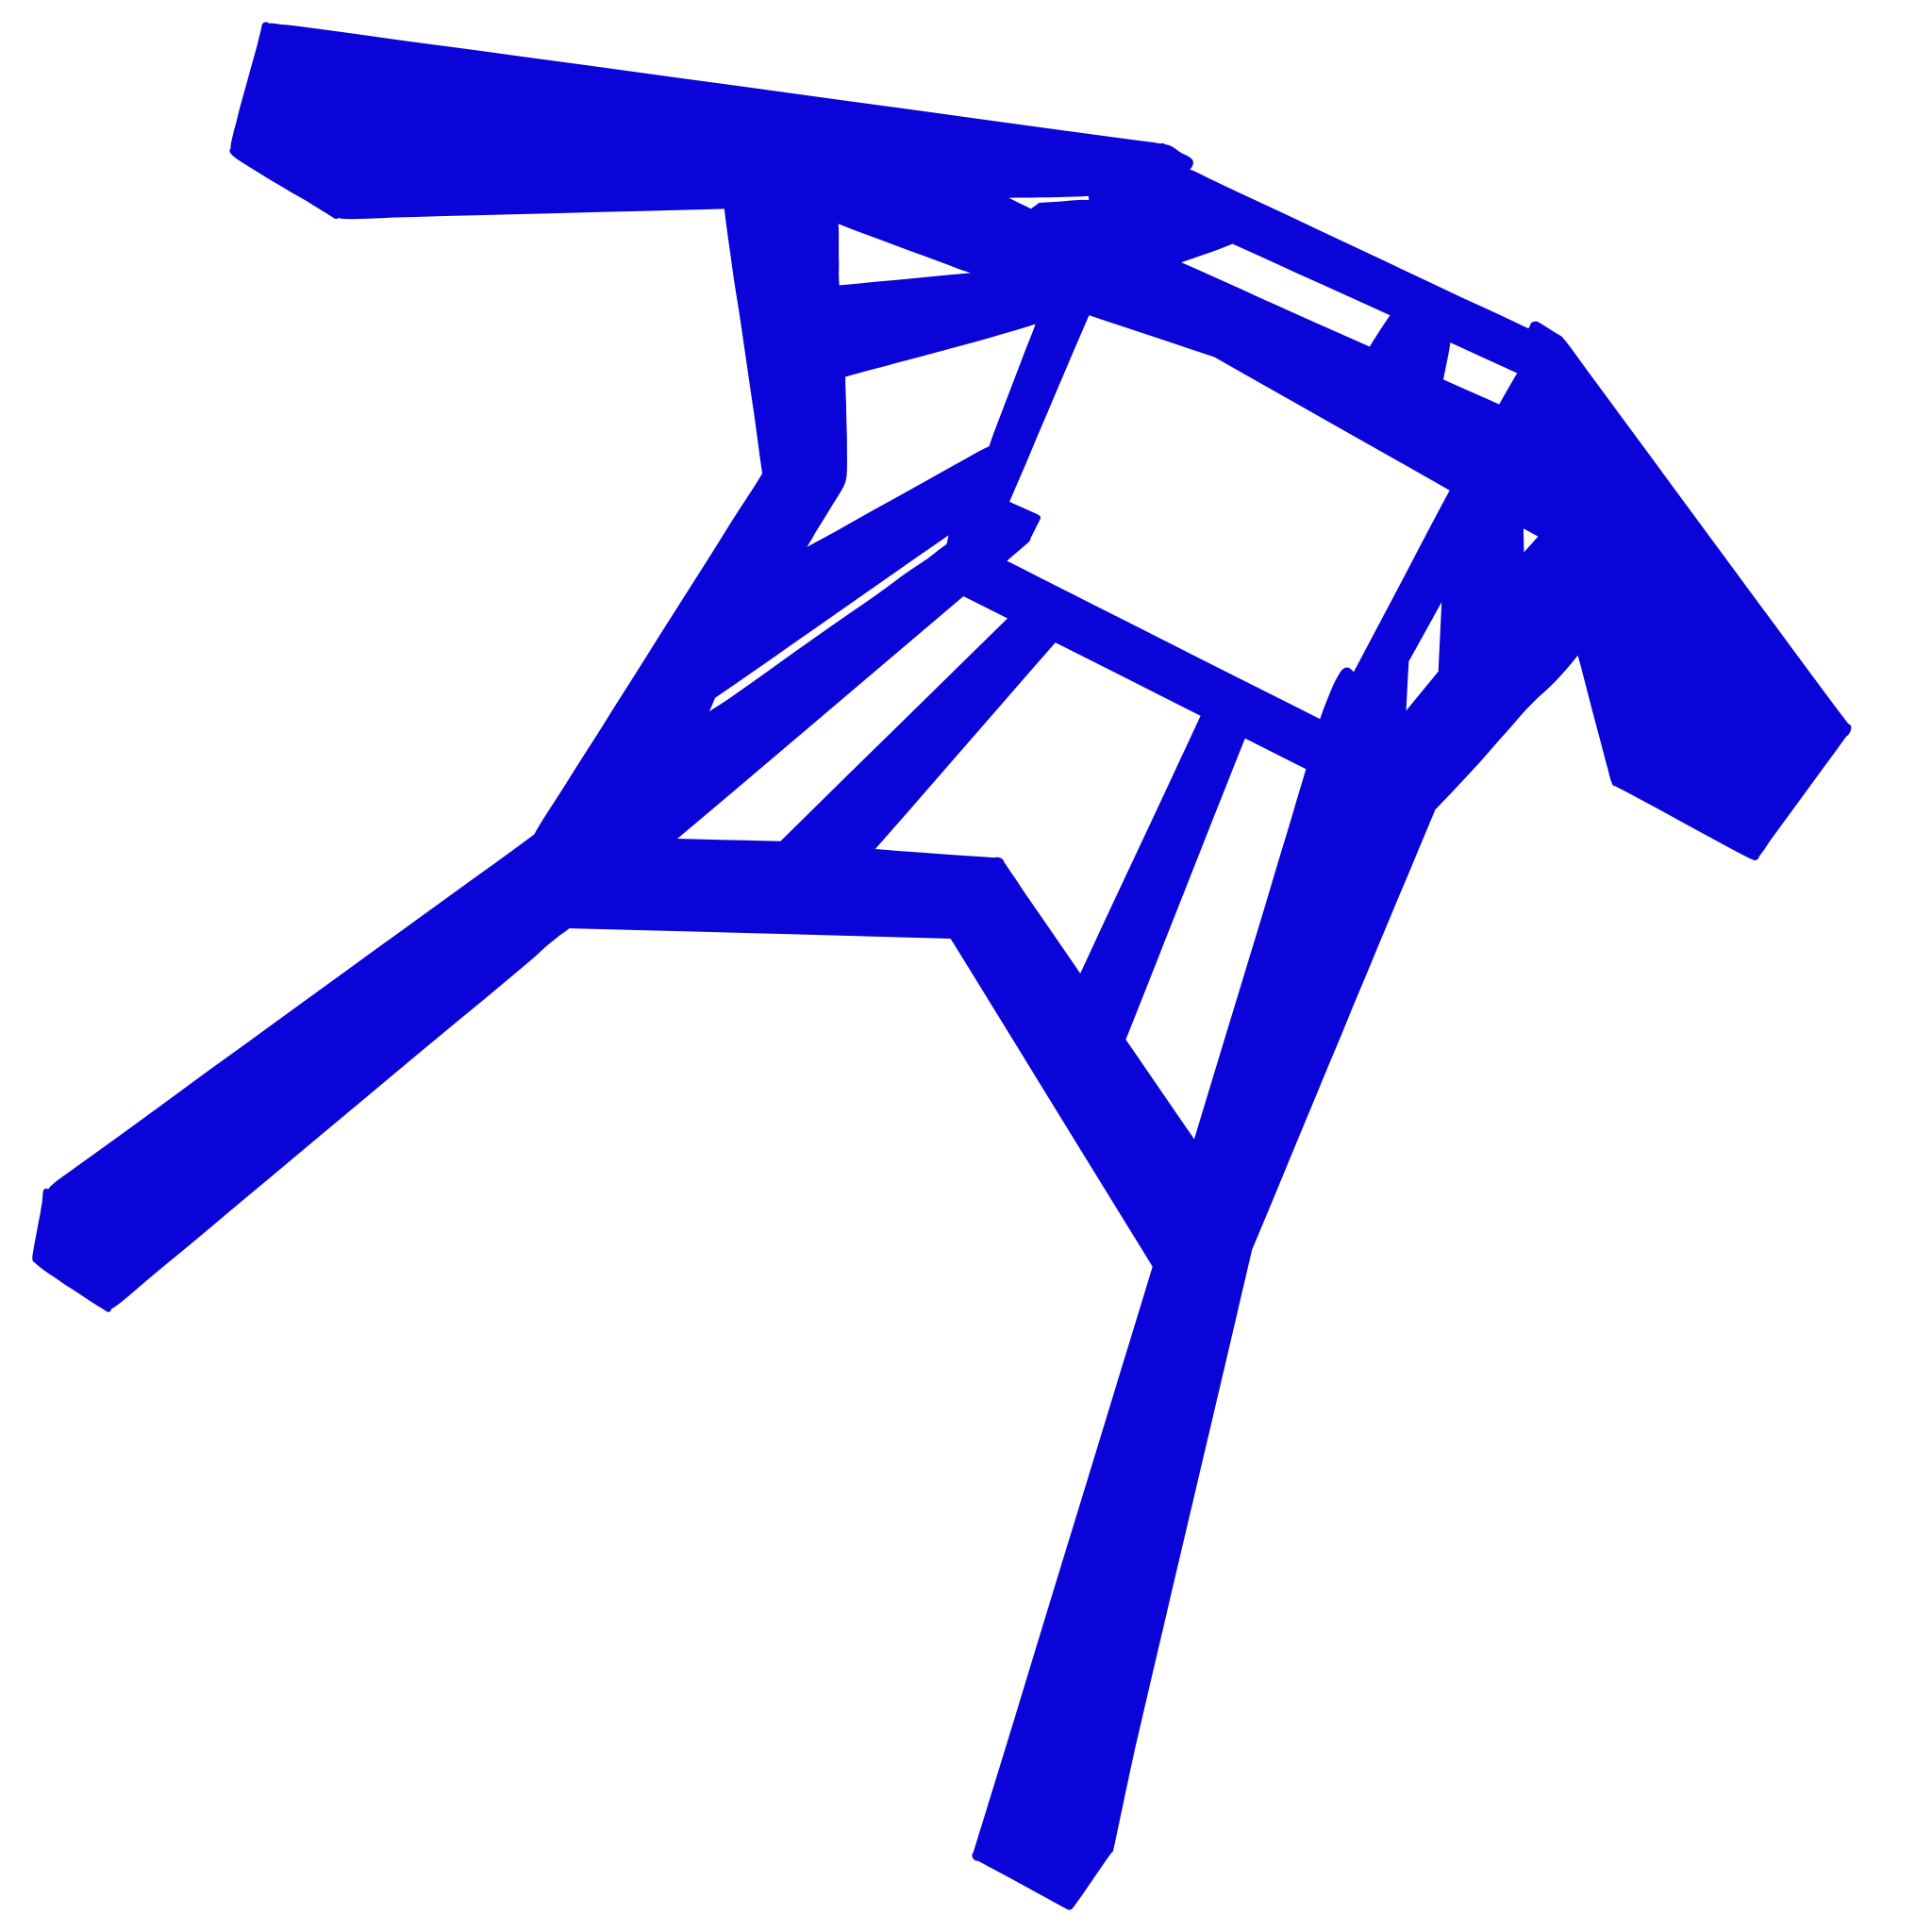 Blue digital Drawing, structure with four legs from bottom perspective